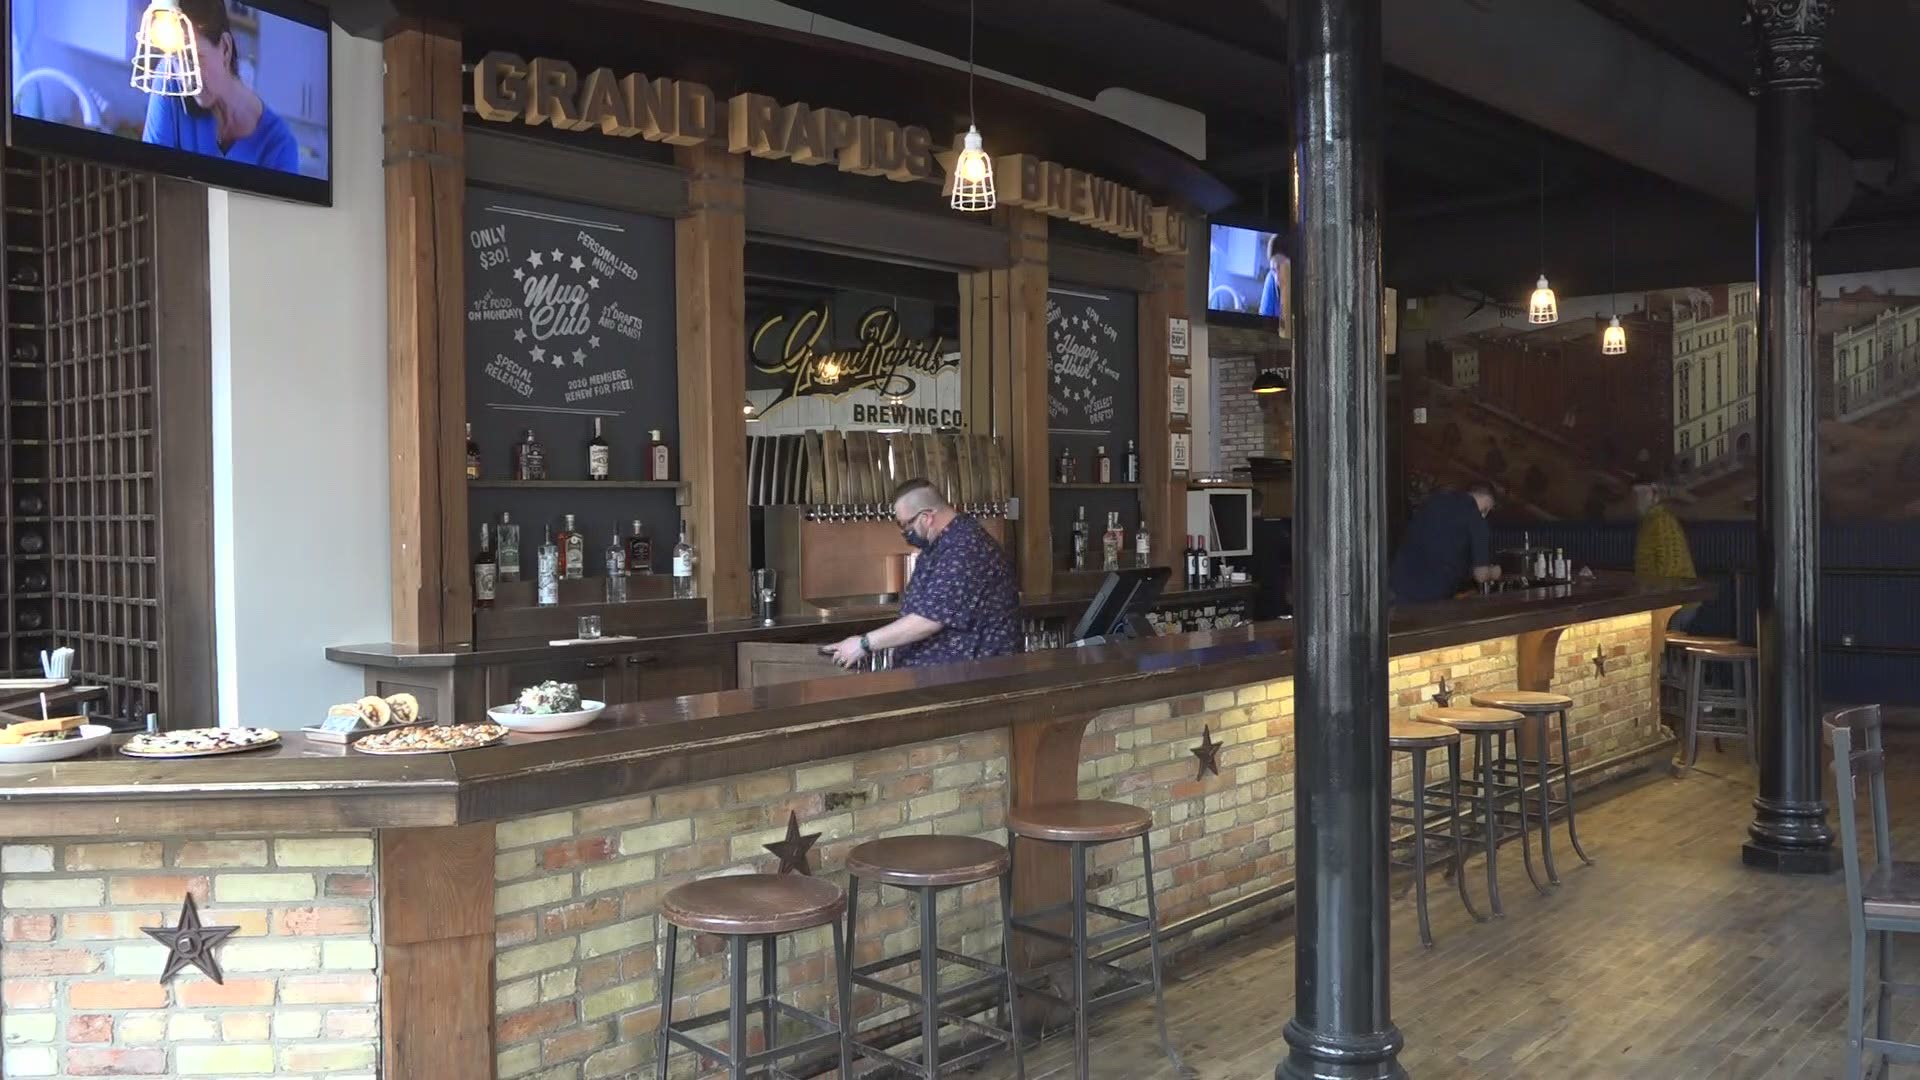 The Grand Rapids Brewing Company took the pandemic as an opportunity to revamp its menu and interior.